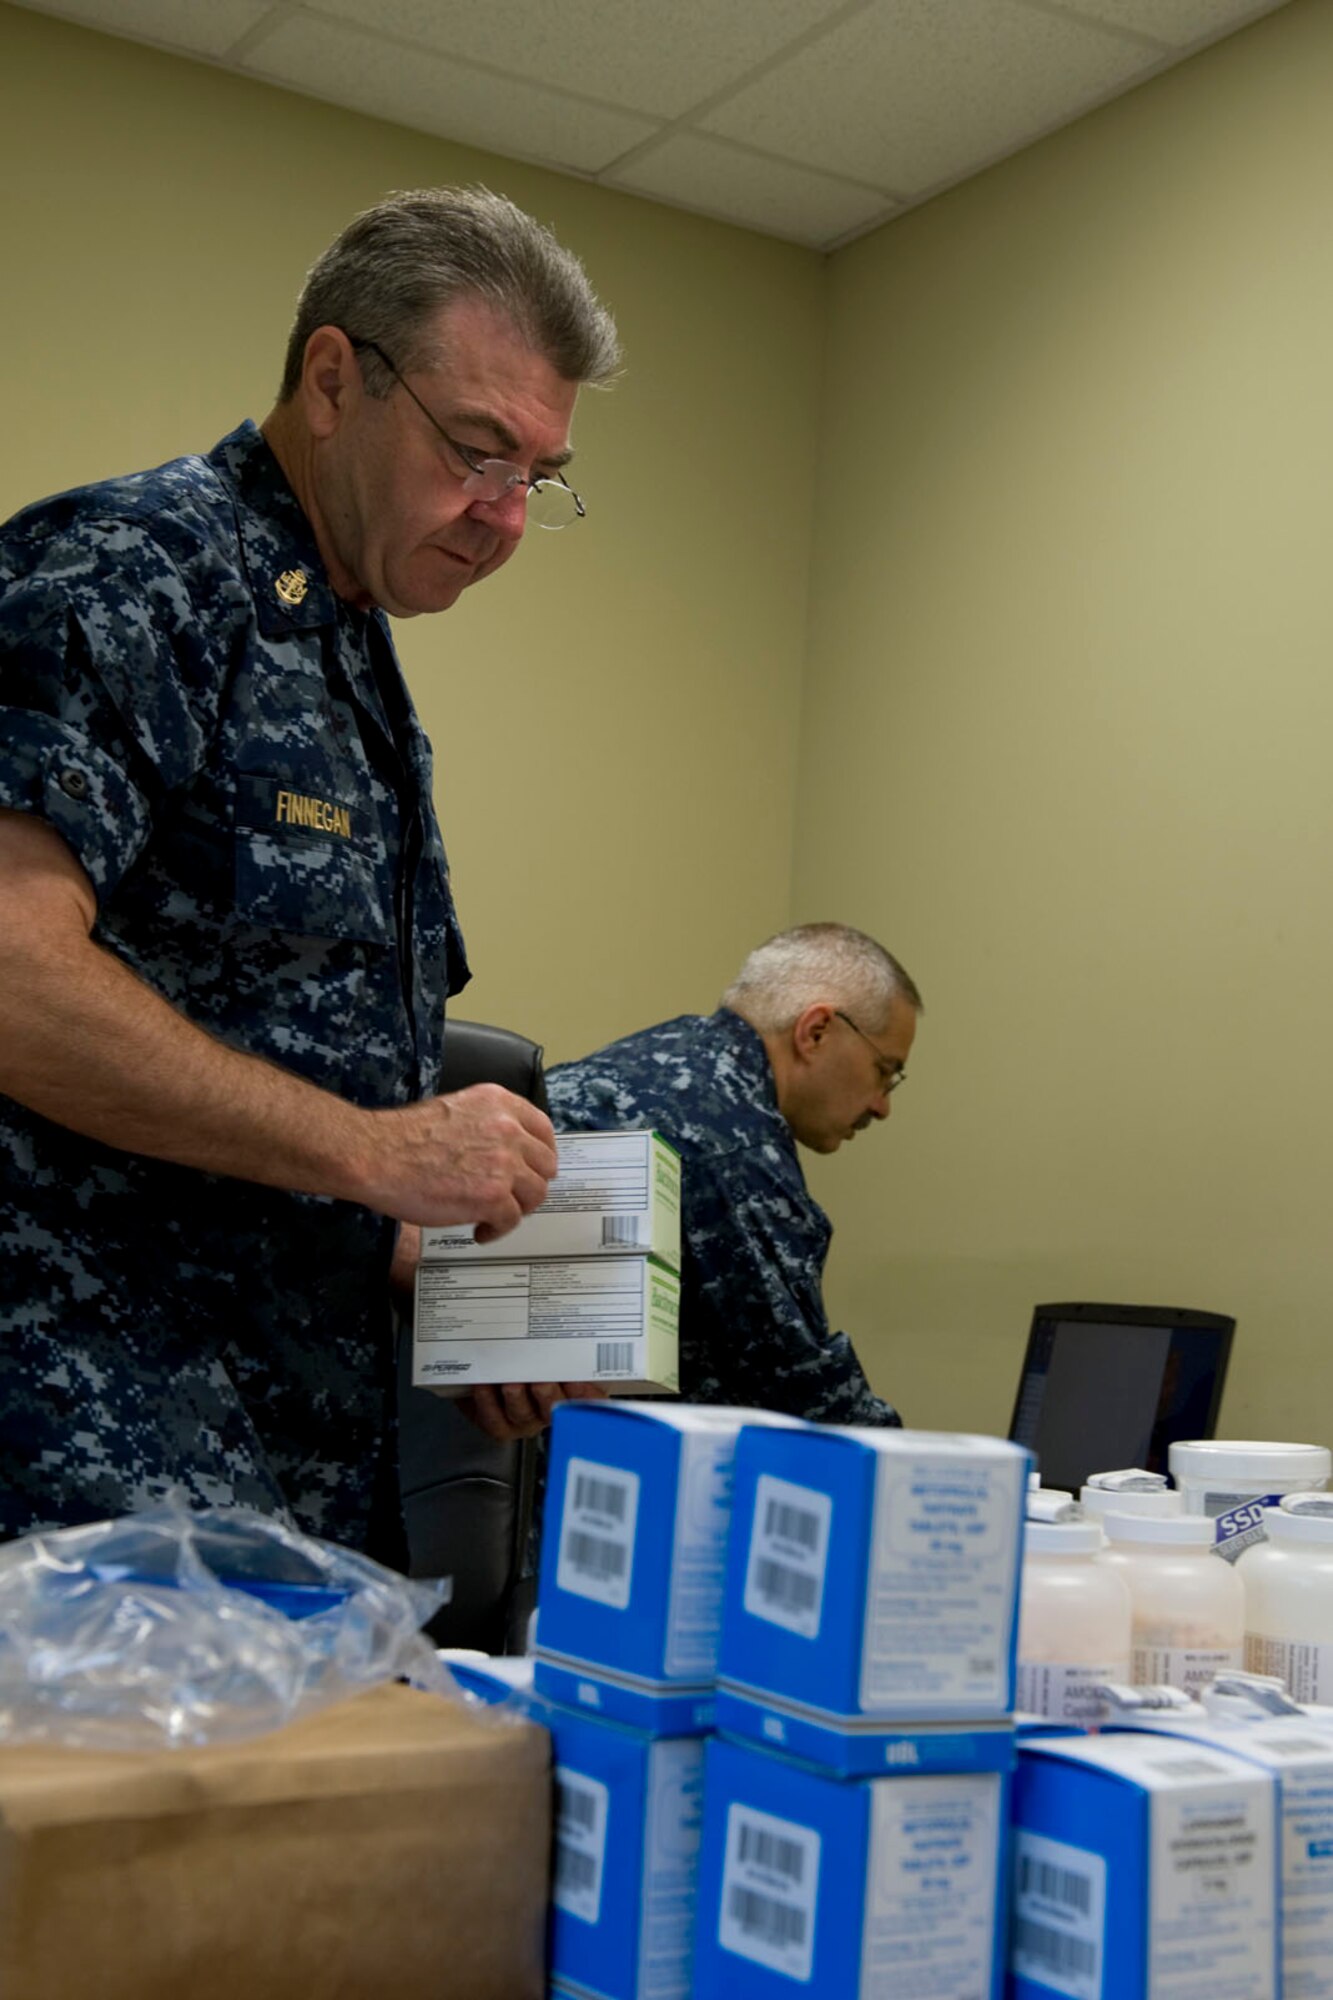 HAYNEVILLE, Ala. - Chief Petty Officer Joseph Finnegan, a pharmacy technician, from the Navy Operation Support Center, Pittsburgh, Pa., and Navy Capt. Edward Cretaro, a pharmacist, from the Navy Operation Support Center, Scheneectady, N.Y., organize pharmacy supplies, May 5, 2011. Finnegan and Cretaro are in Alabama along with about sixty other medical professional from numerous military components and services for an Innovative Readiness Training (IRT) mission. The IRT program allows for real world training opportunities for military personnel while providing needed services to under-served communities in the United States. Alaska Air National Guard photo by Master Sgt. Shannon Oleson.